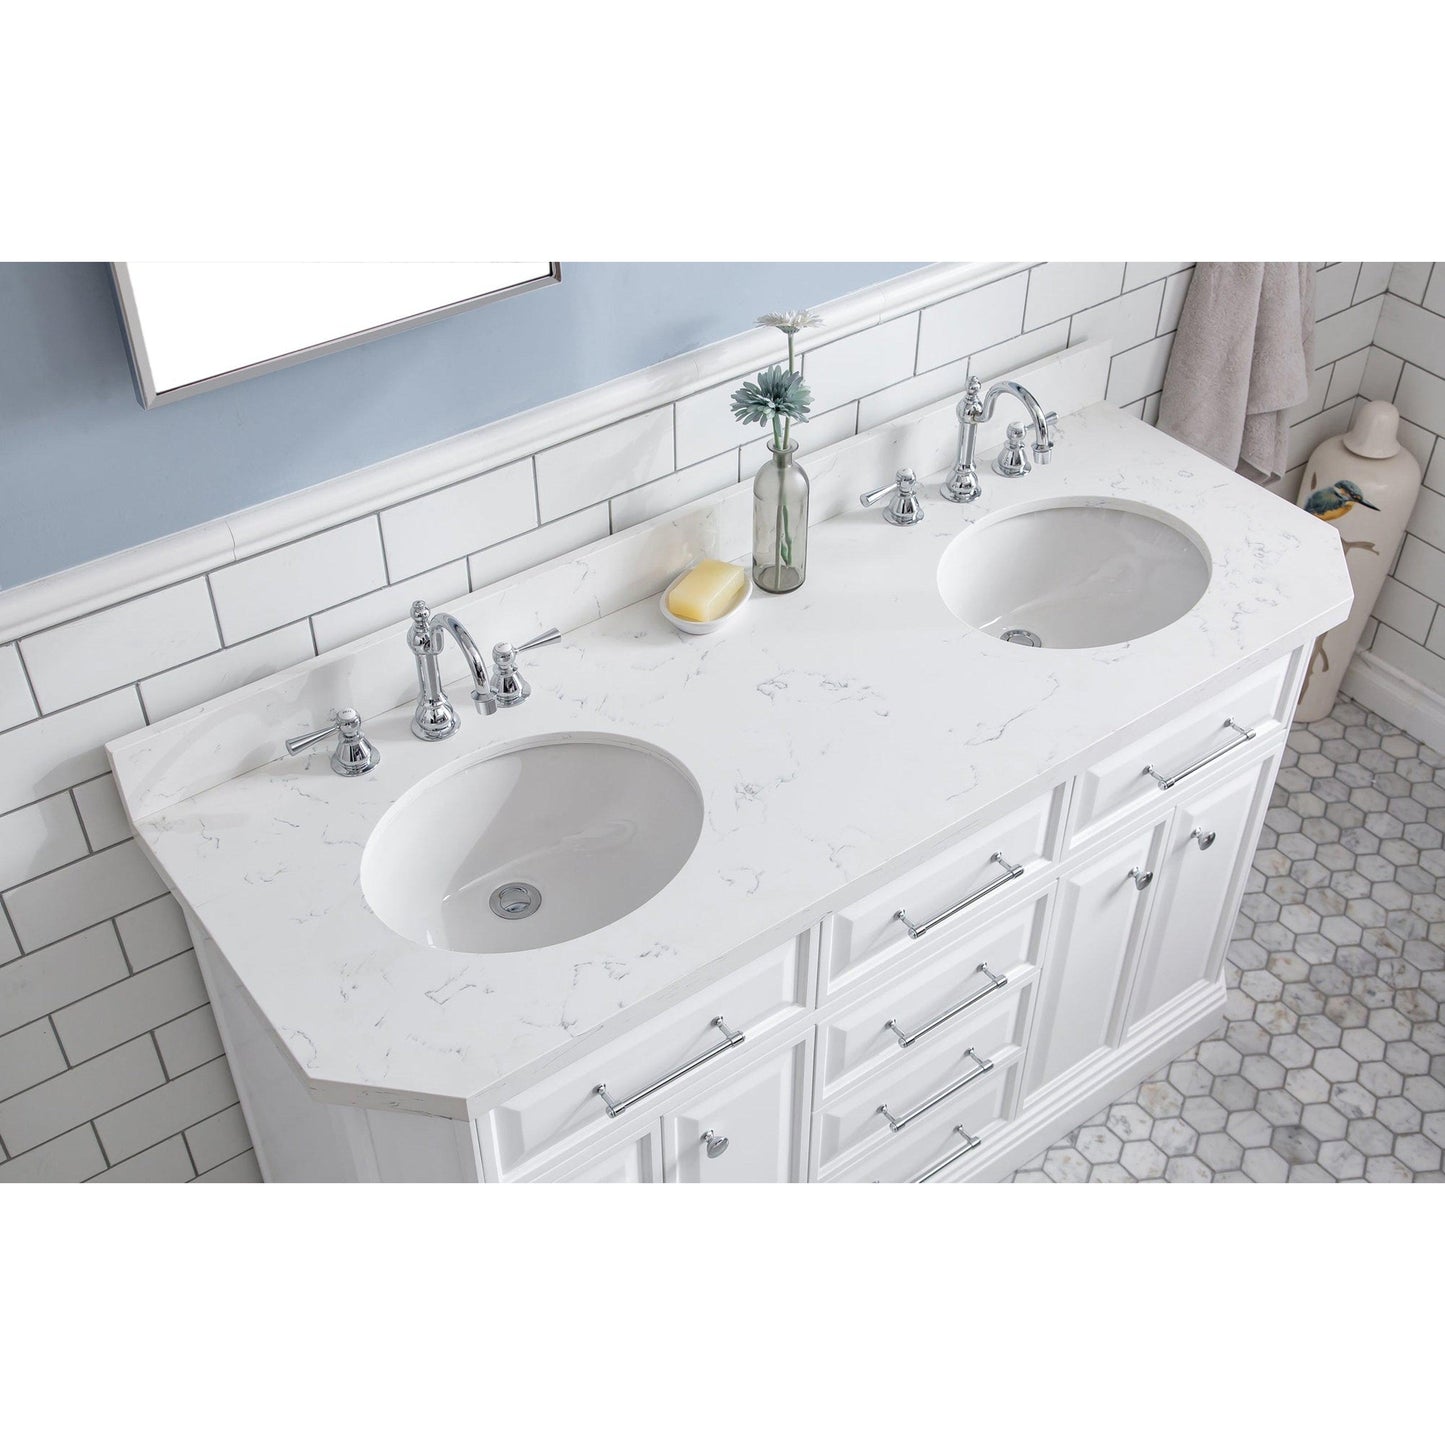 Water Creation Palace 60" Quartz Carrara Pure White Bathroom Vanity Set With Hardware And F2-0012 Faucets in Chrome Finish